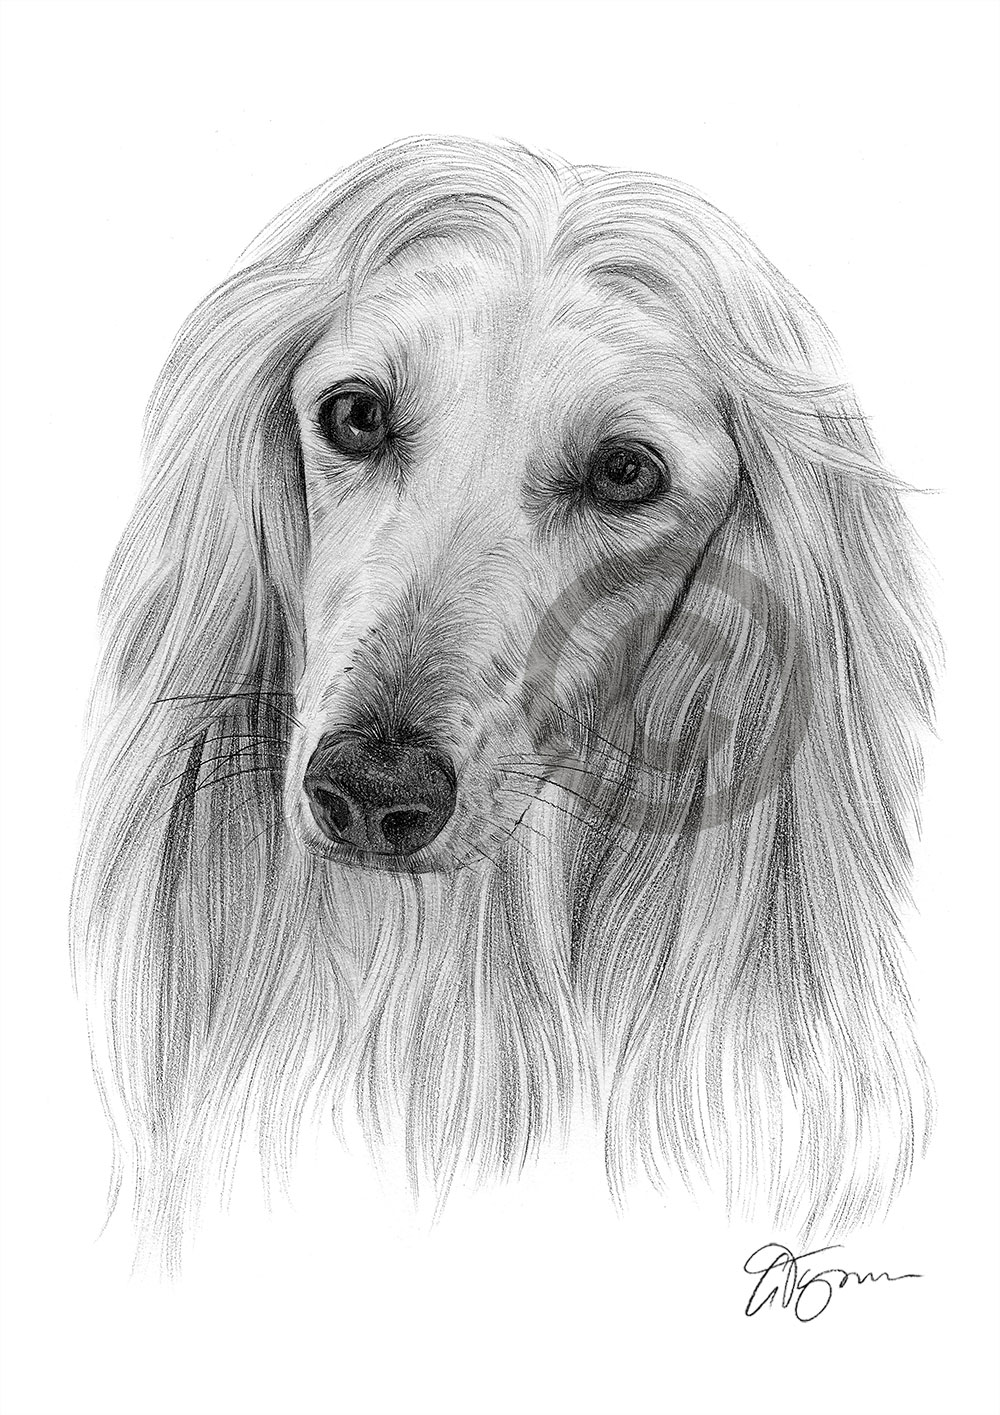 Pencil drawing of an Afghan Hound by artist Gary Tymon